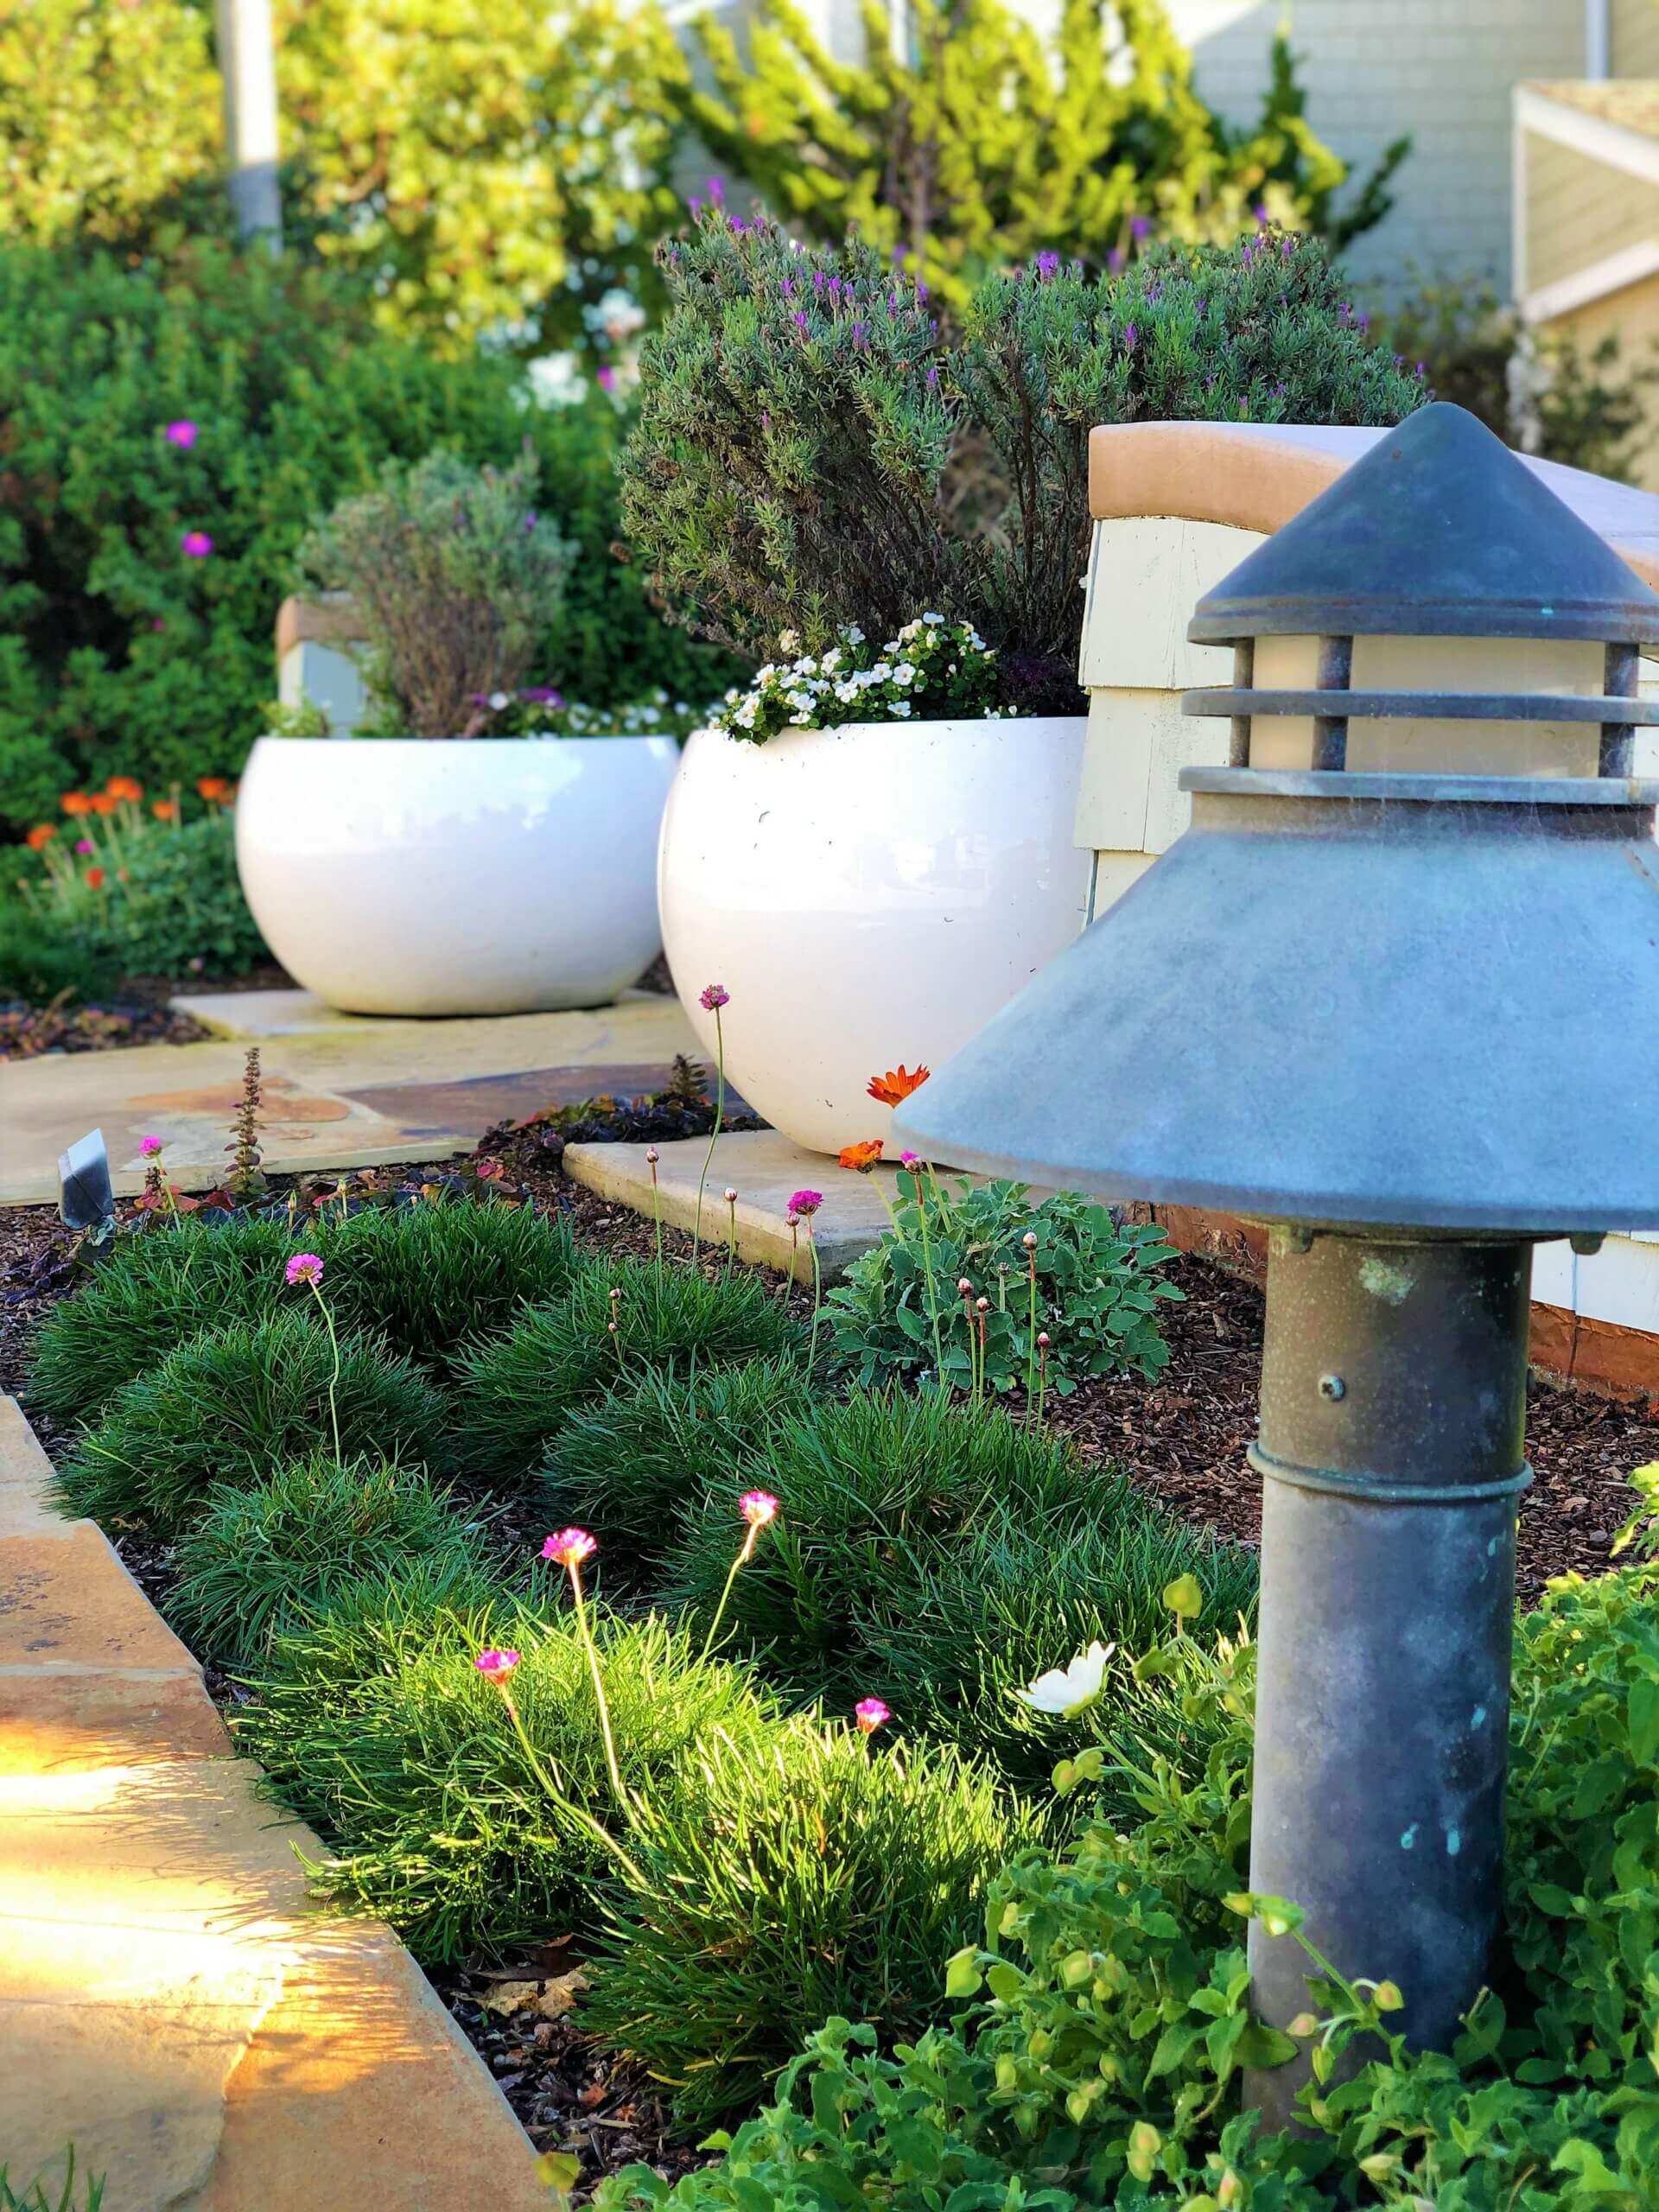 Pair of white planter pots with garden lantern and low grass plantings